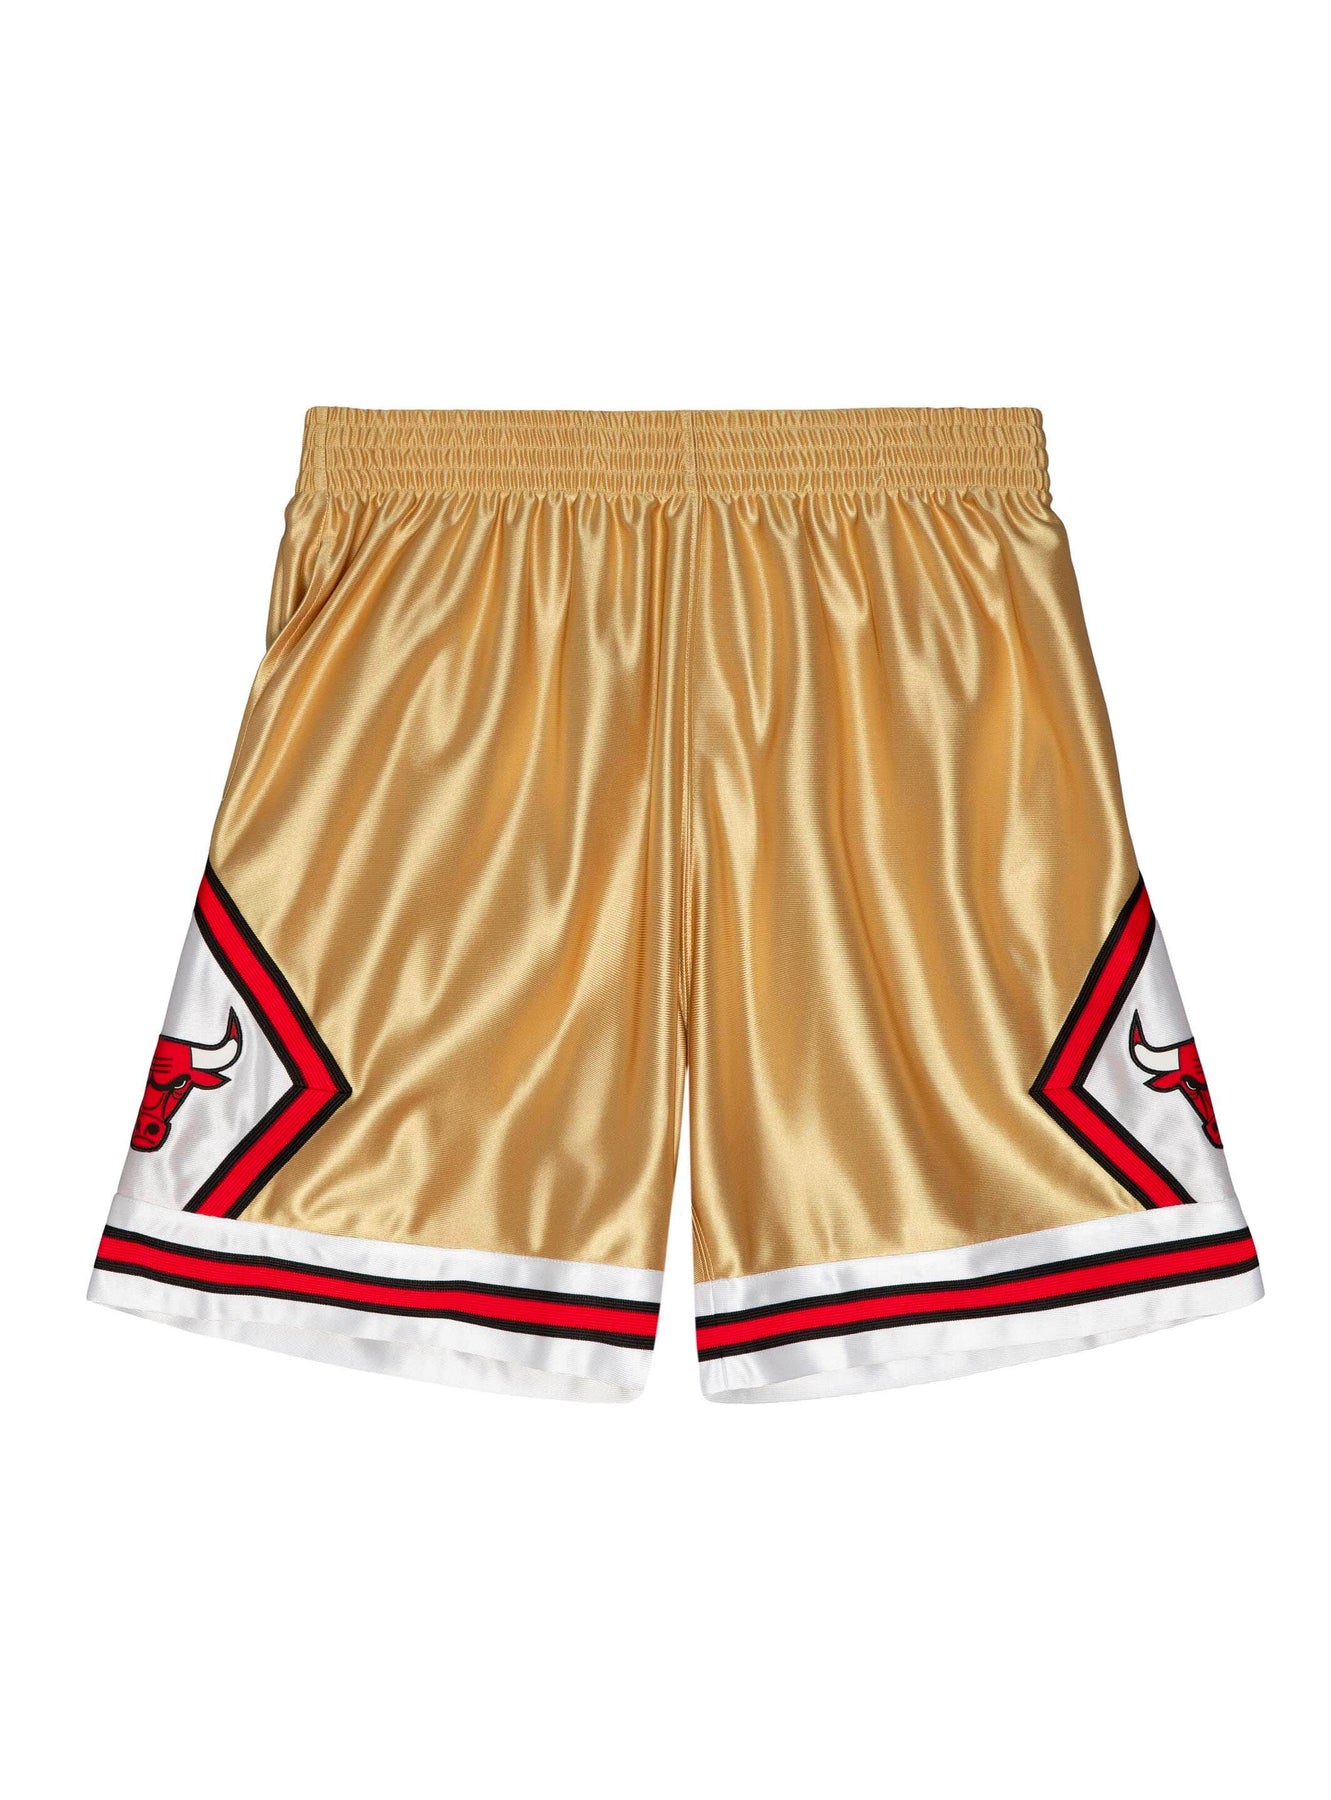 Mitchell & Ness Shorts | Chicago Bulls Shorts | Color: Black/Red | Size: XL | Colinmichael233's Closet